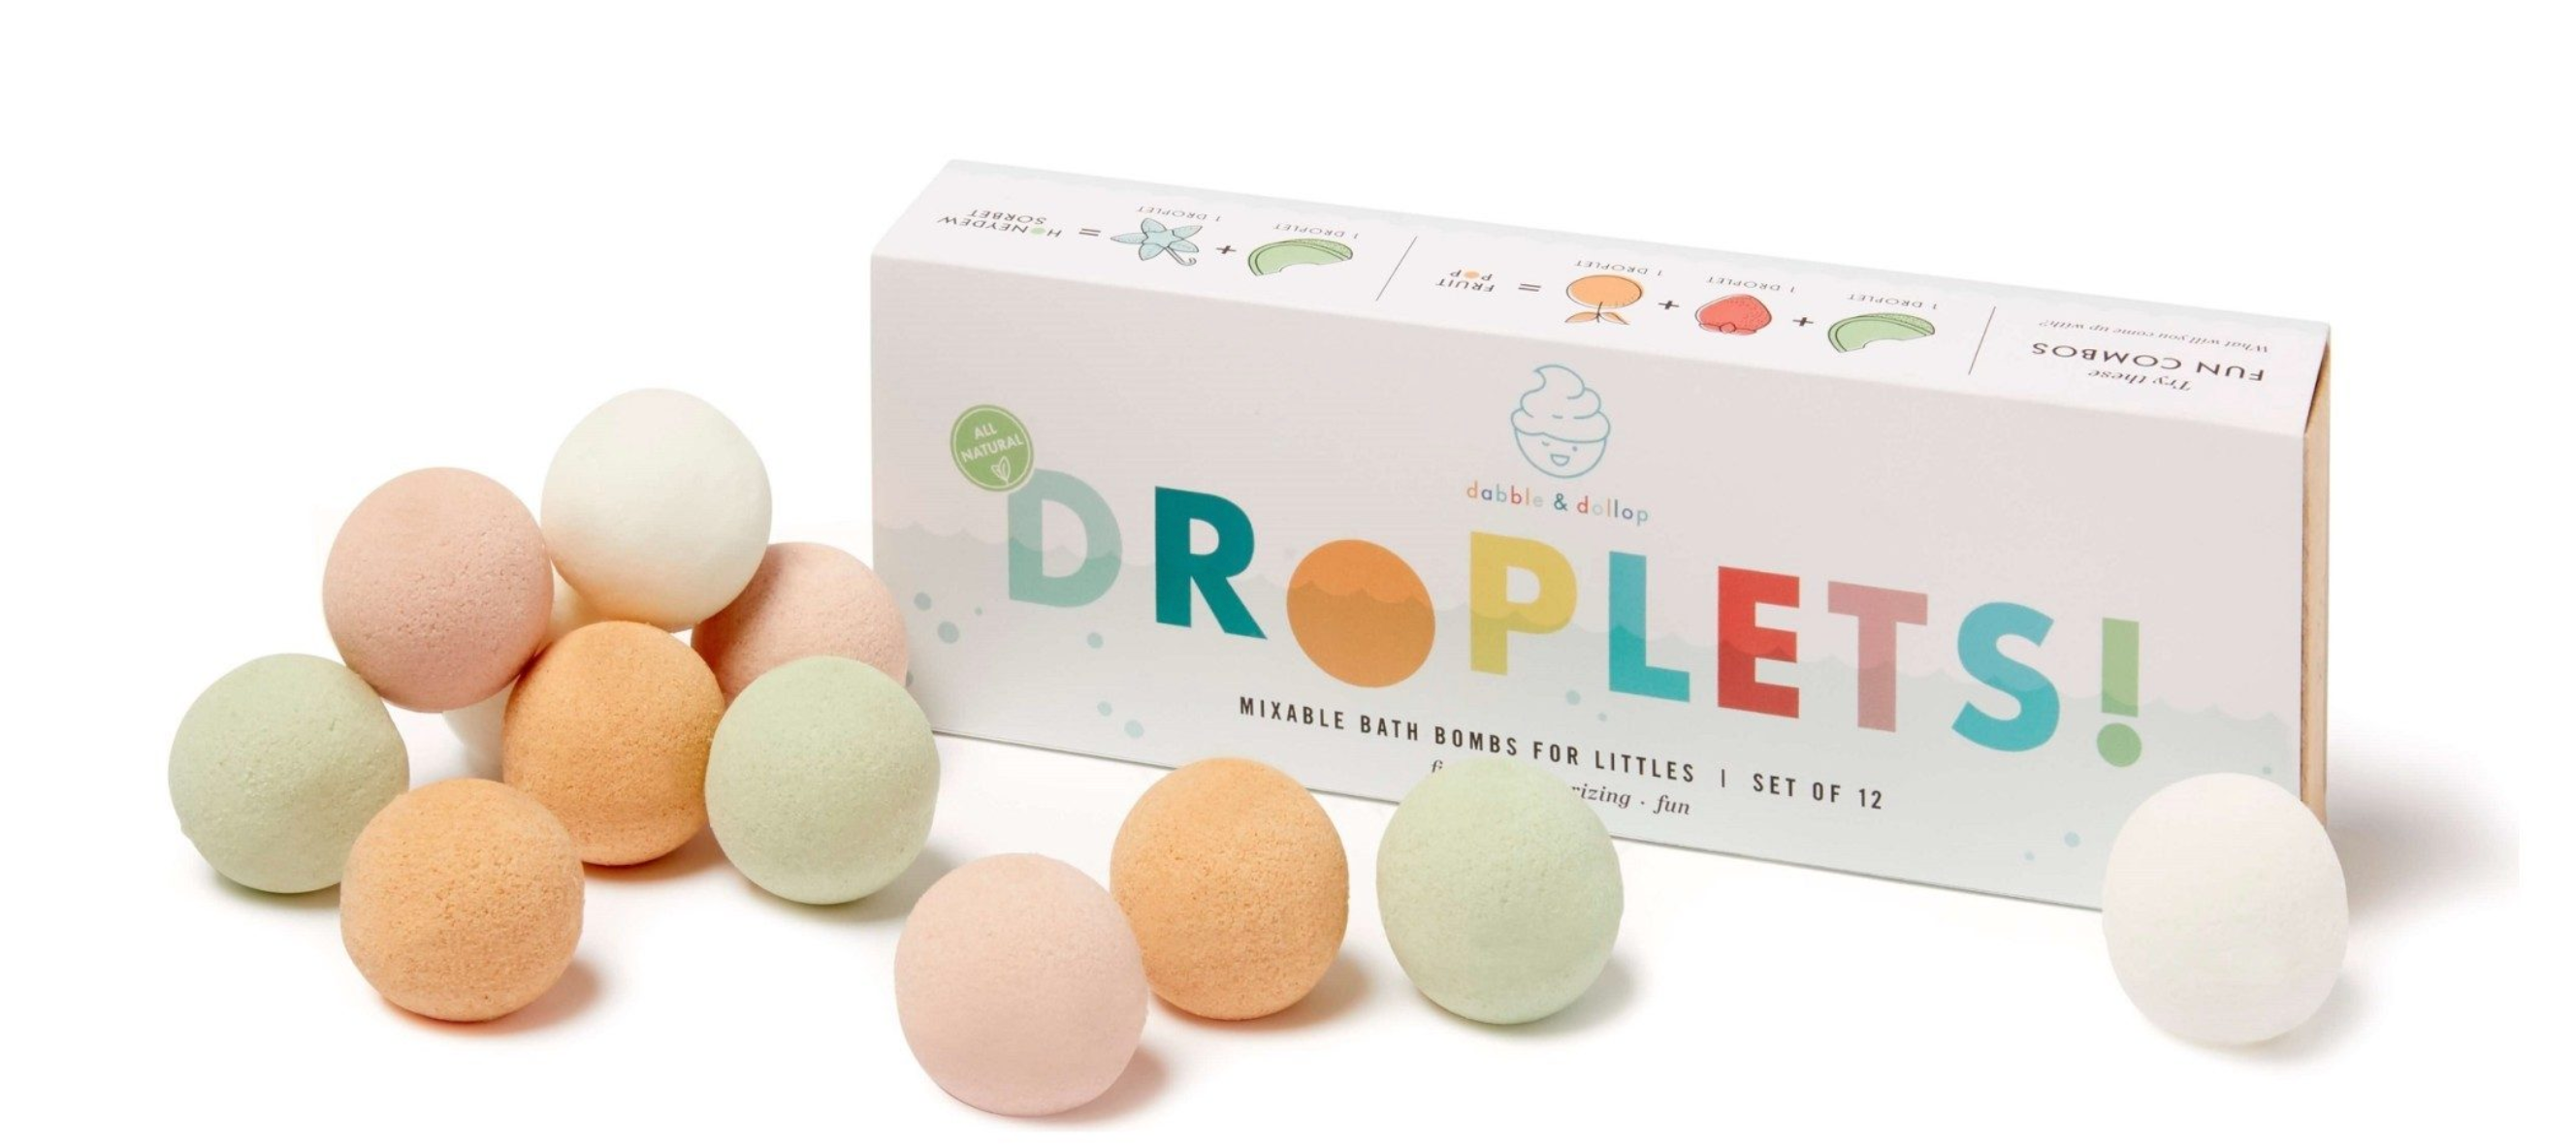 Dabble & Dollop mixable bath bombs